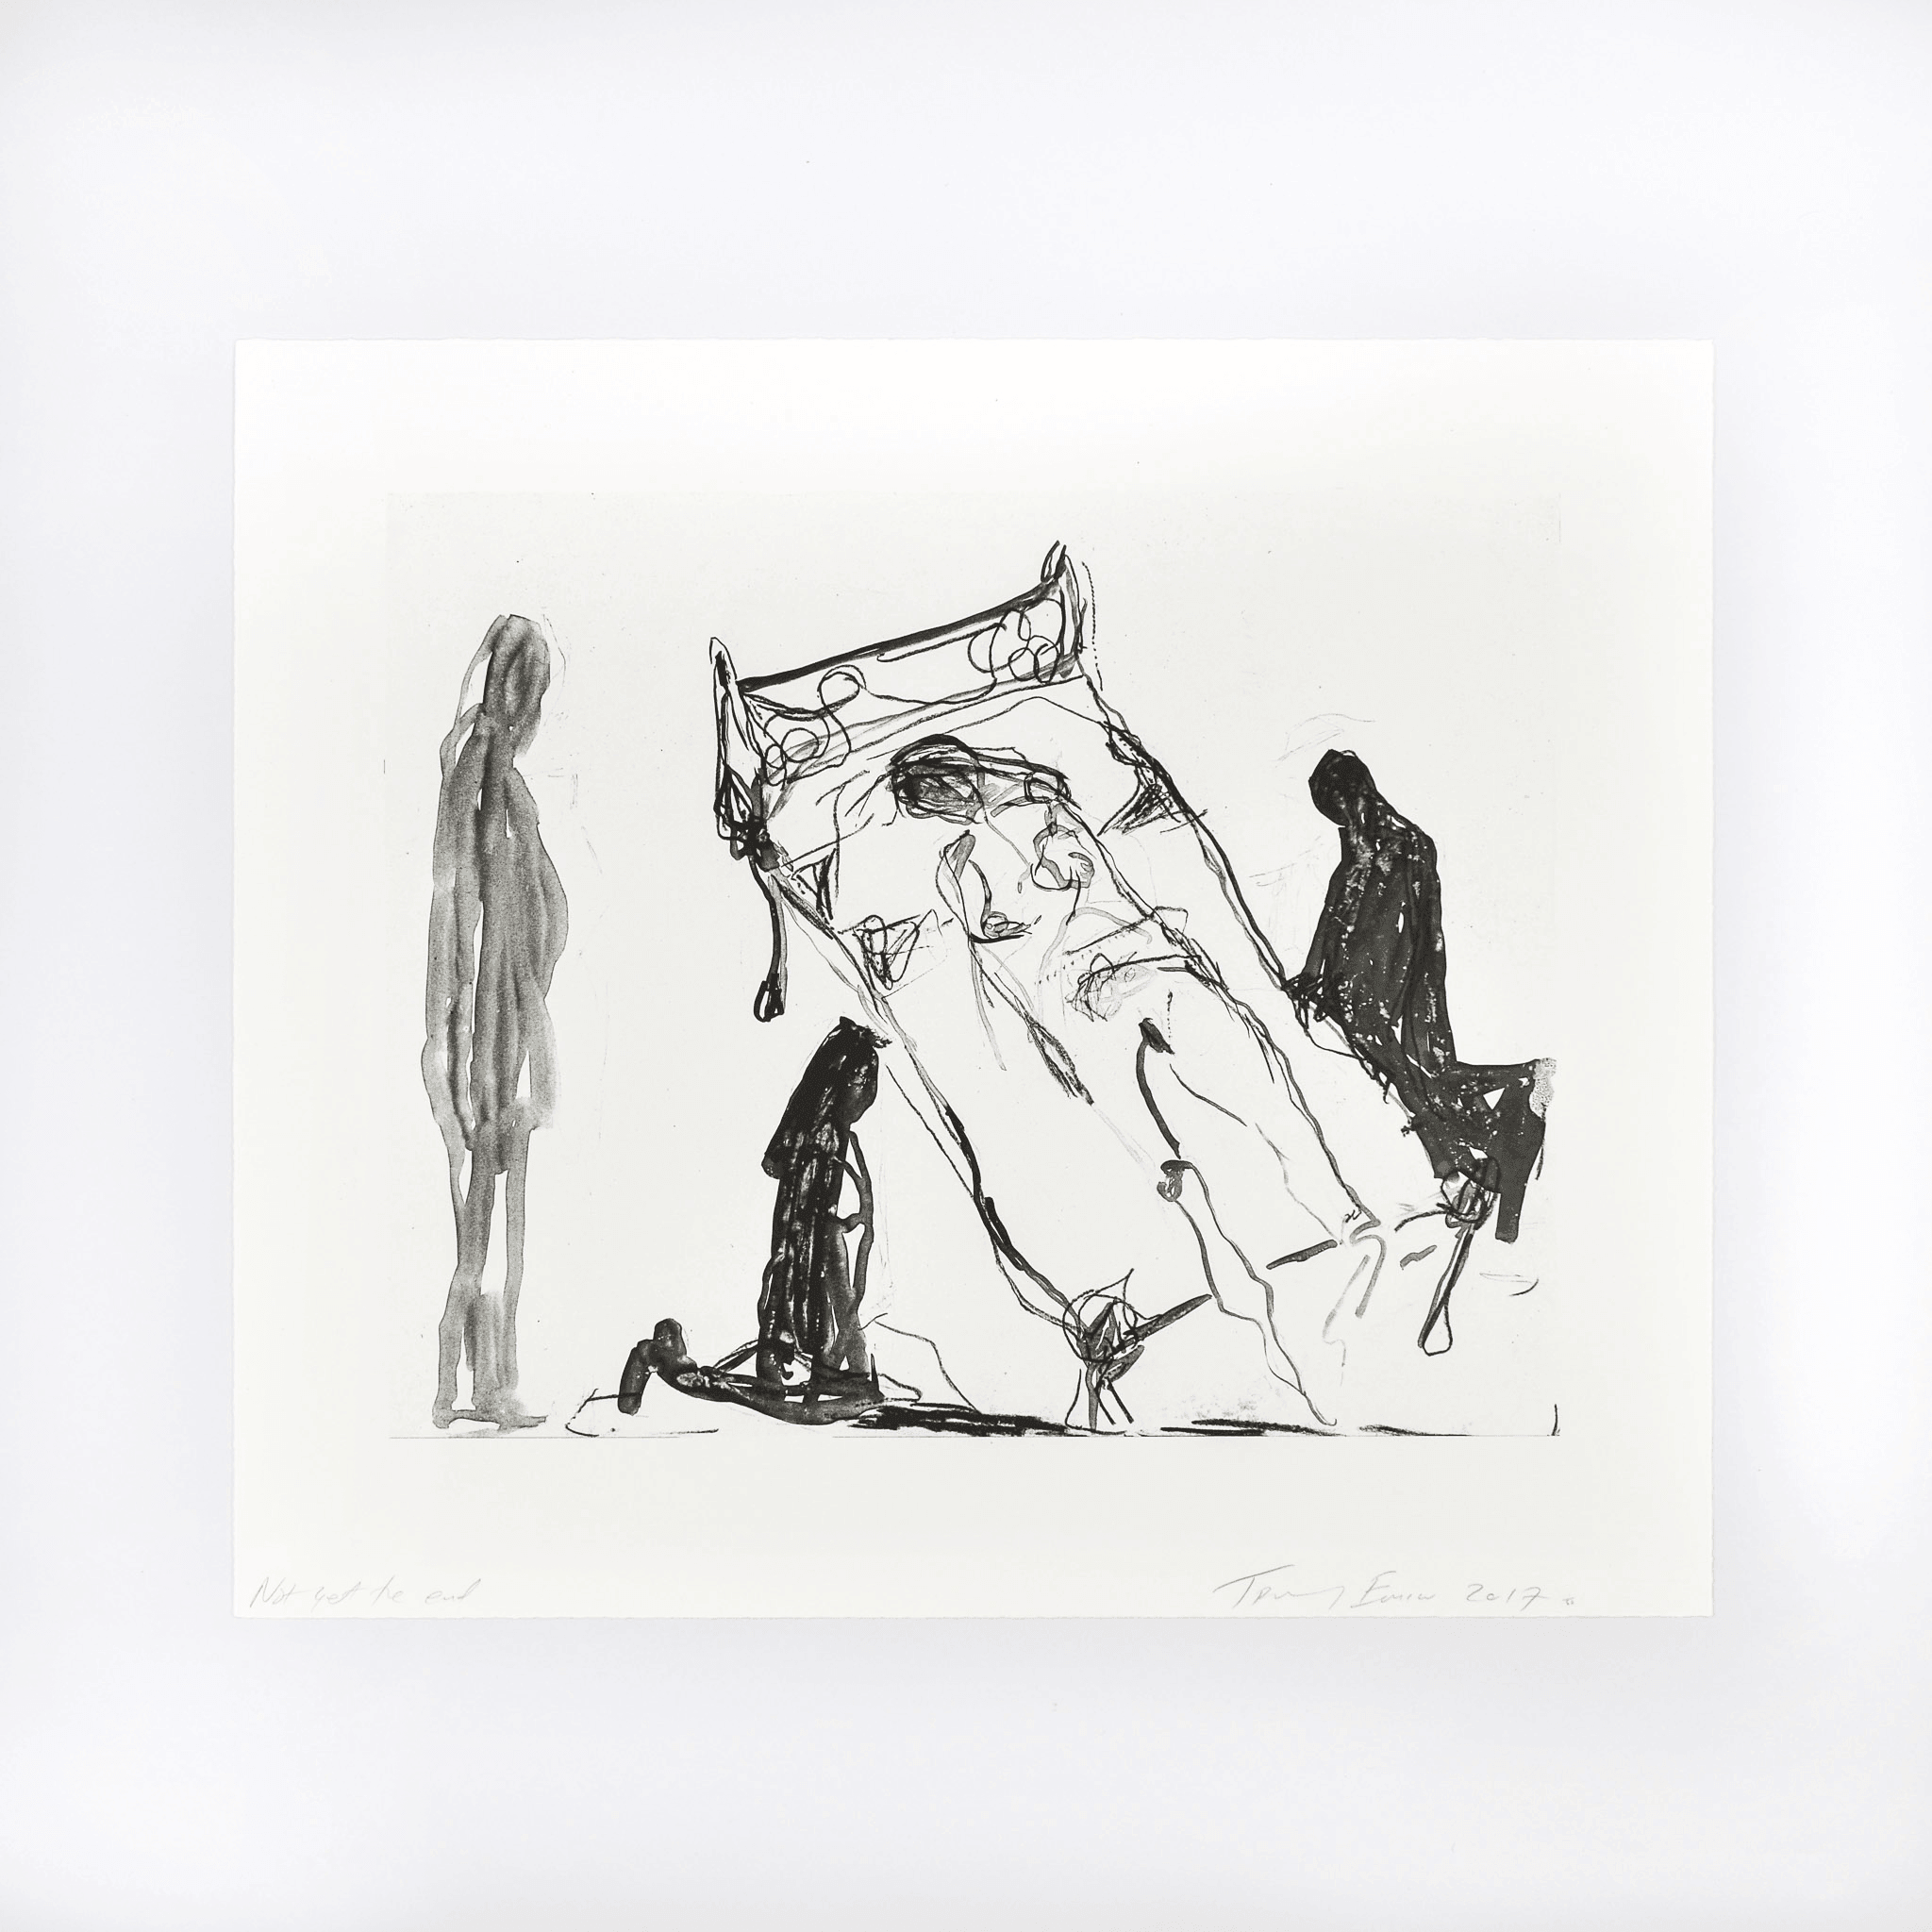 Tracey Emin, Not Yet the End, 2017 For Sale - Lougher Contemporary